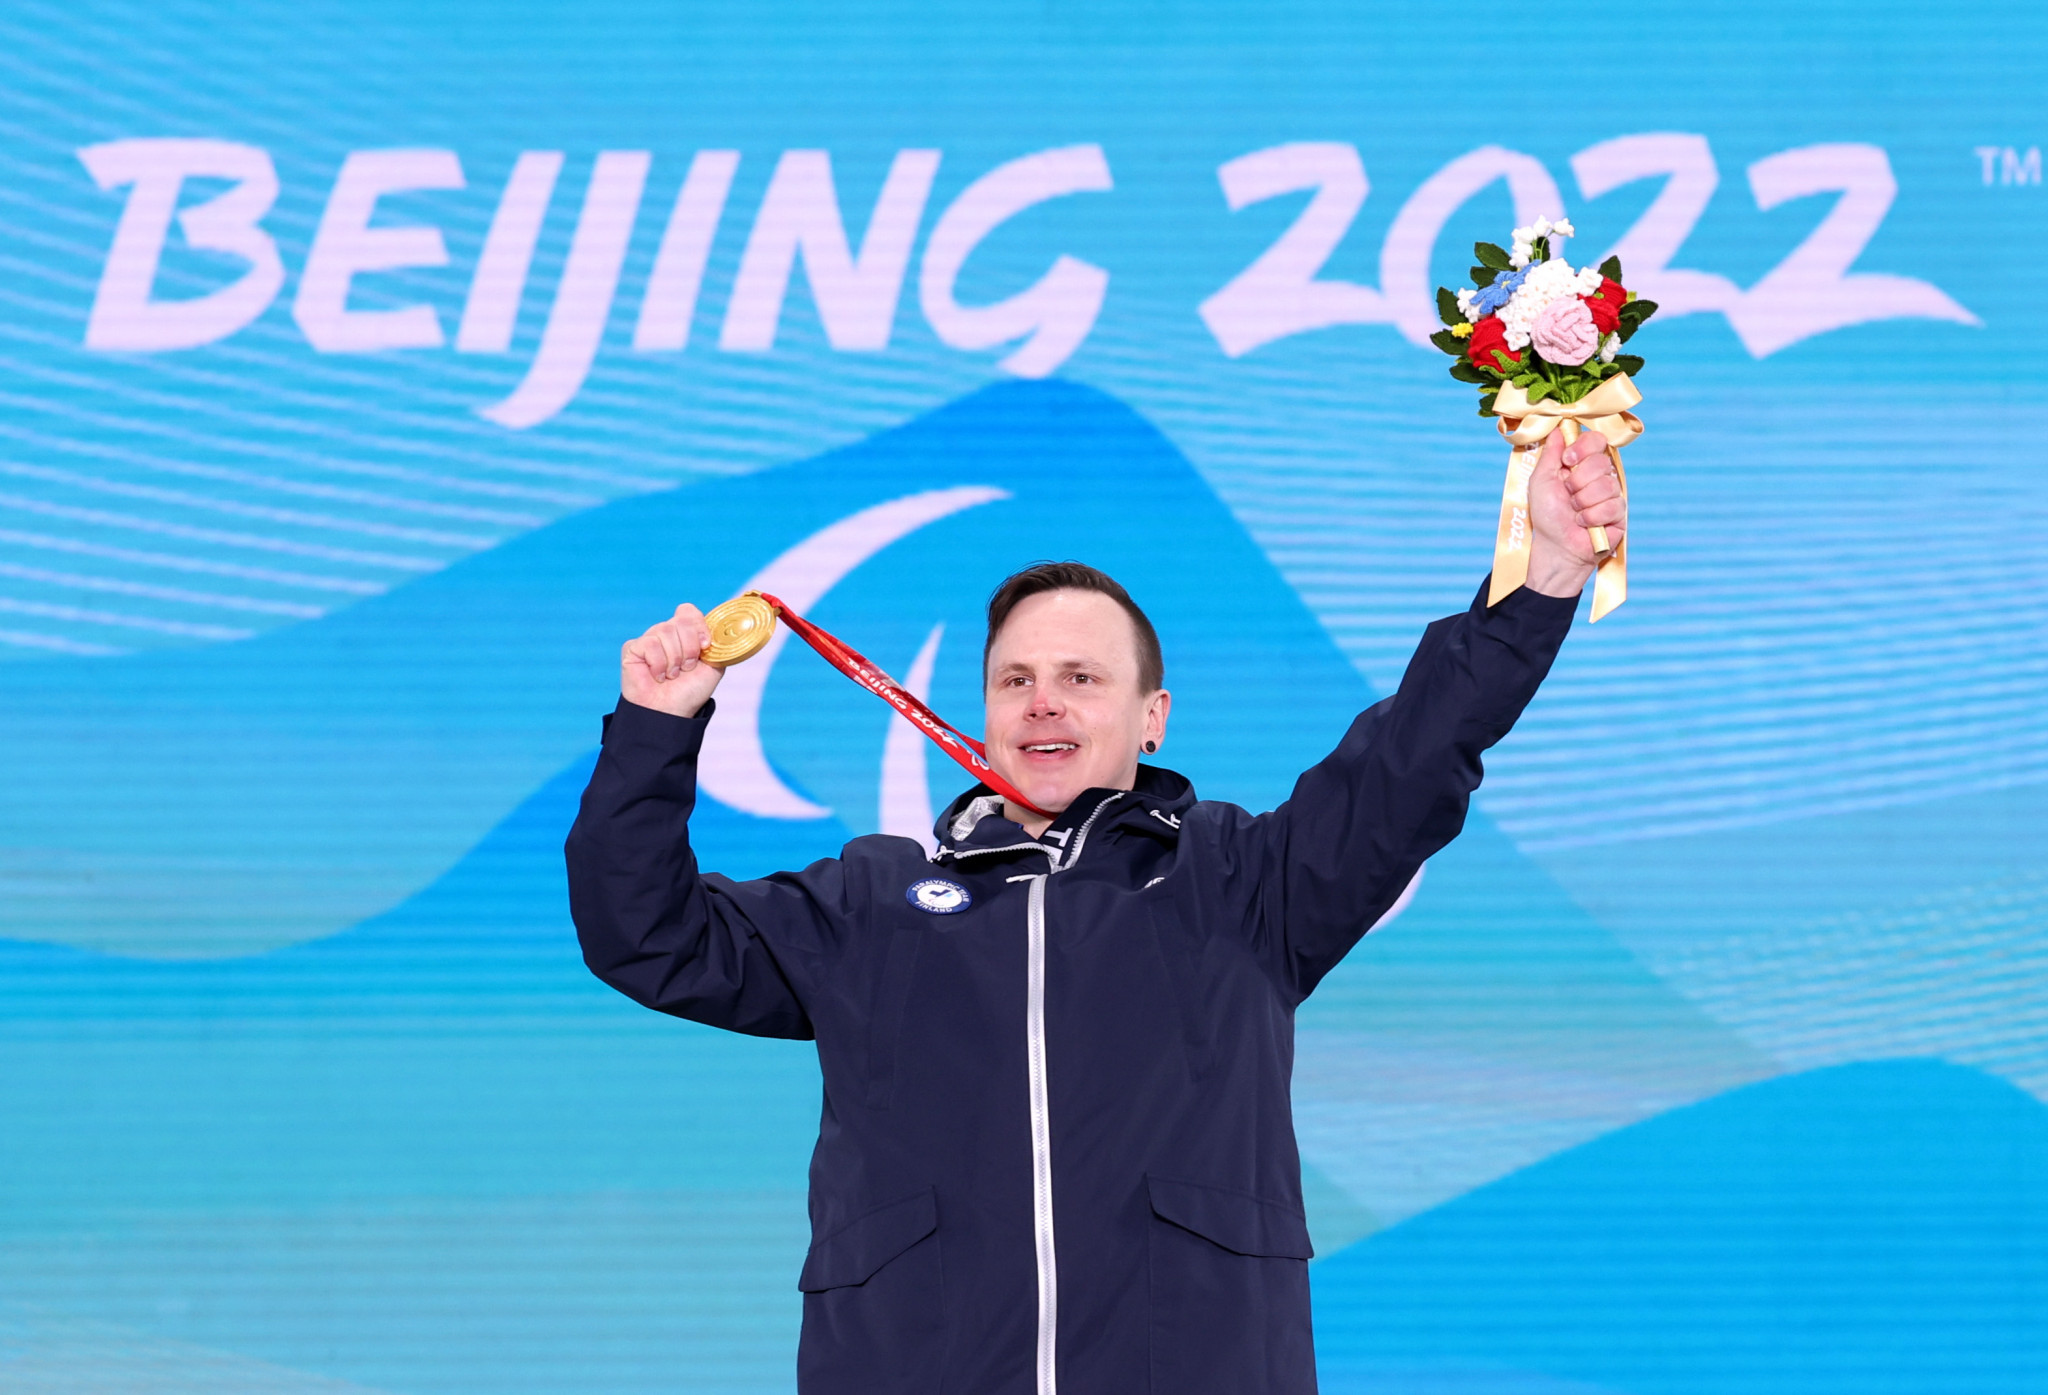 Matti Suur-Hamari won a Paralympic Games gold and silver medal at Beijing 2022 ©Getty Images